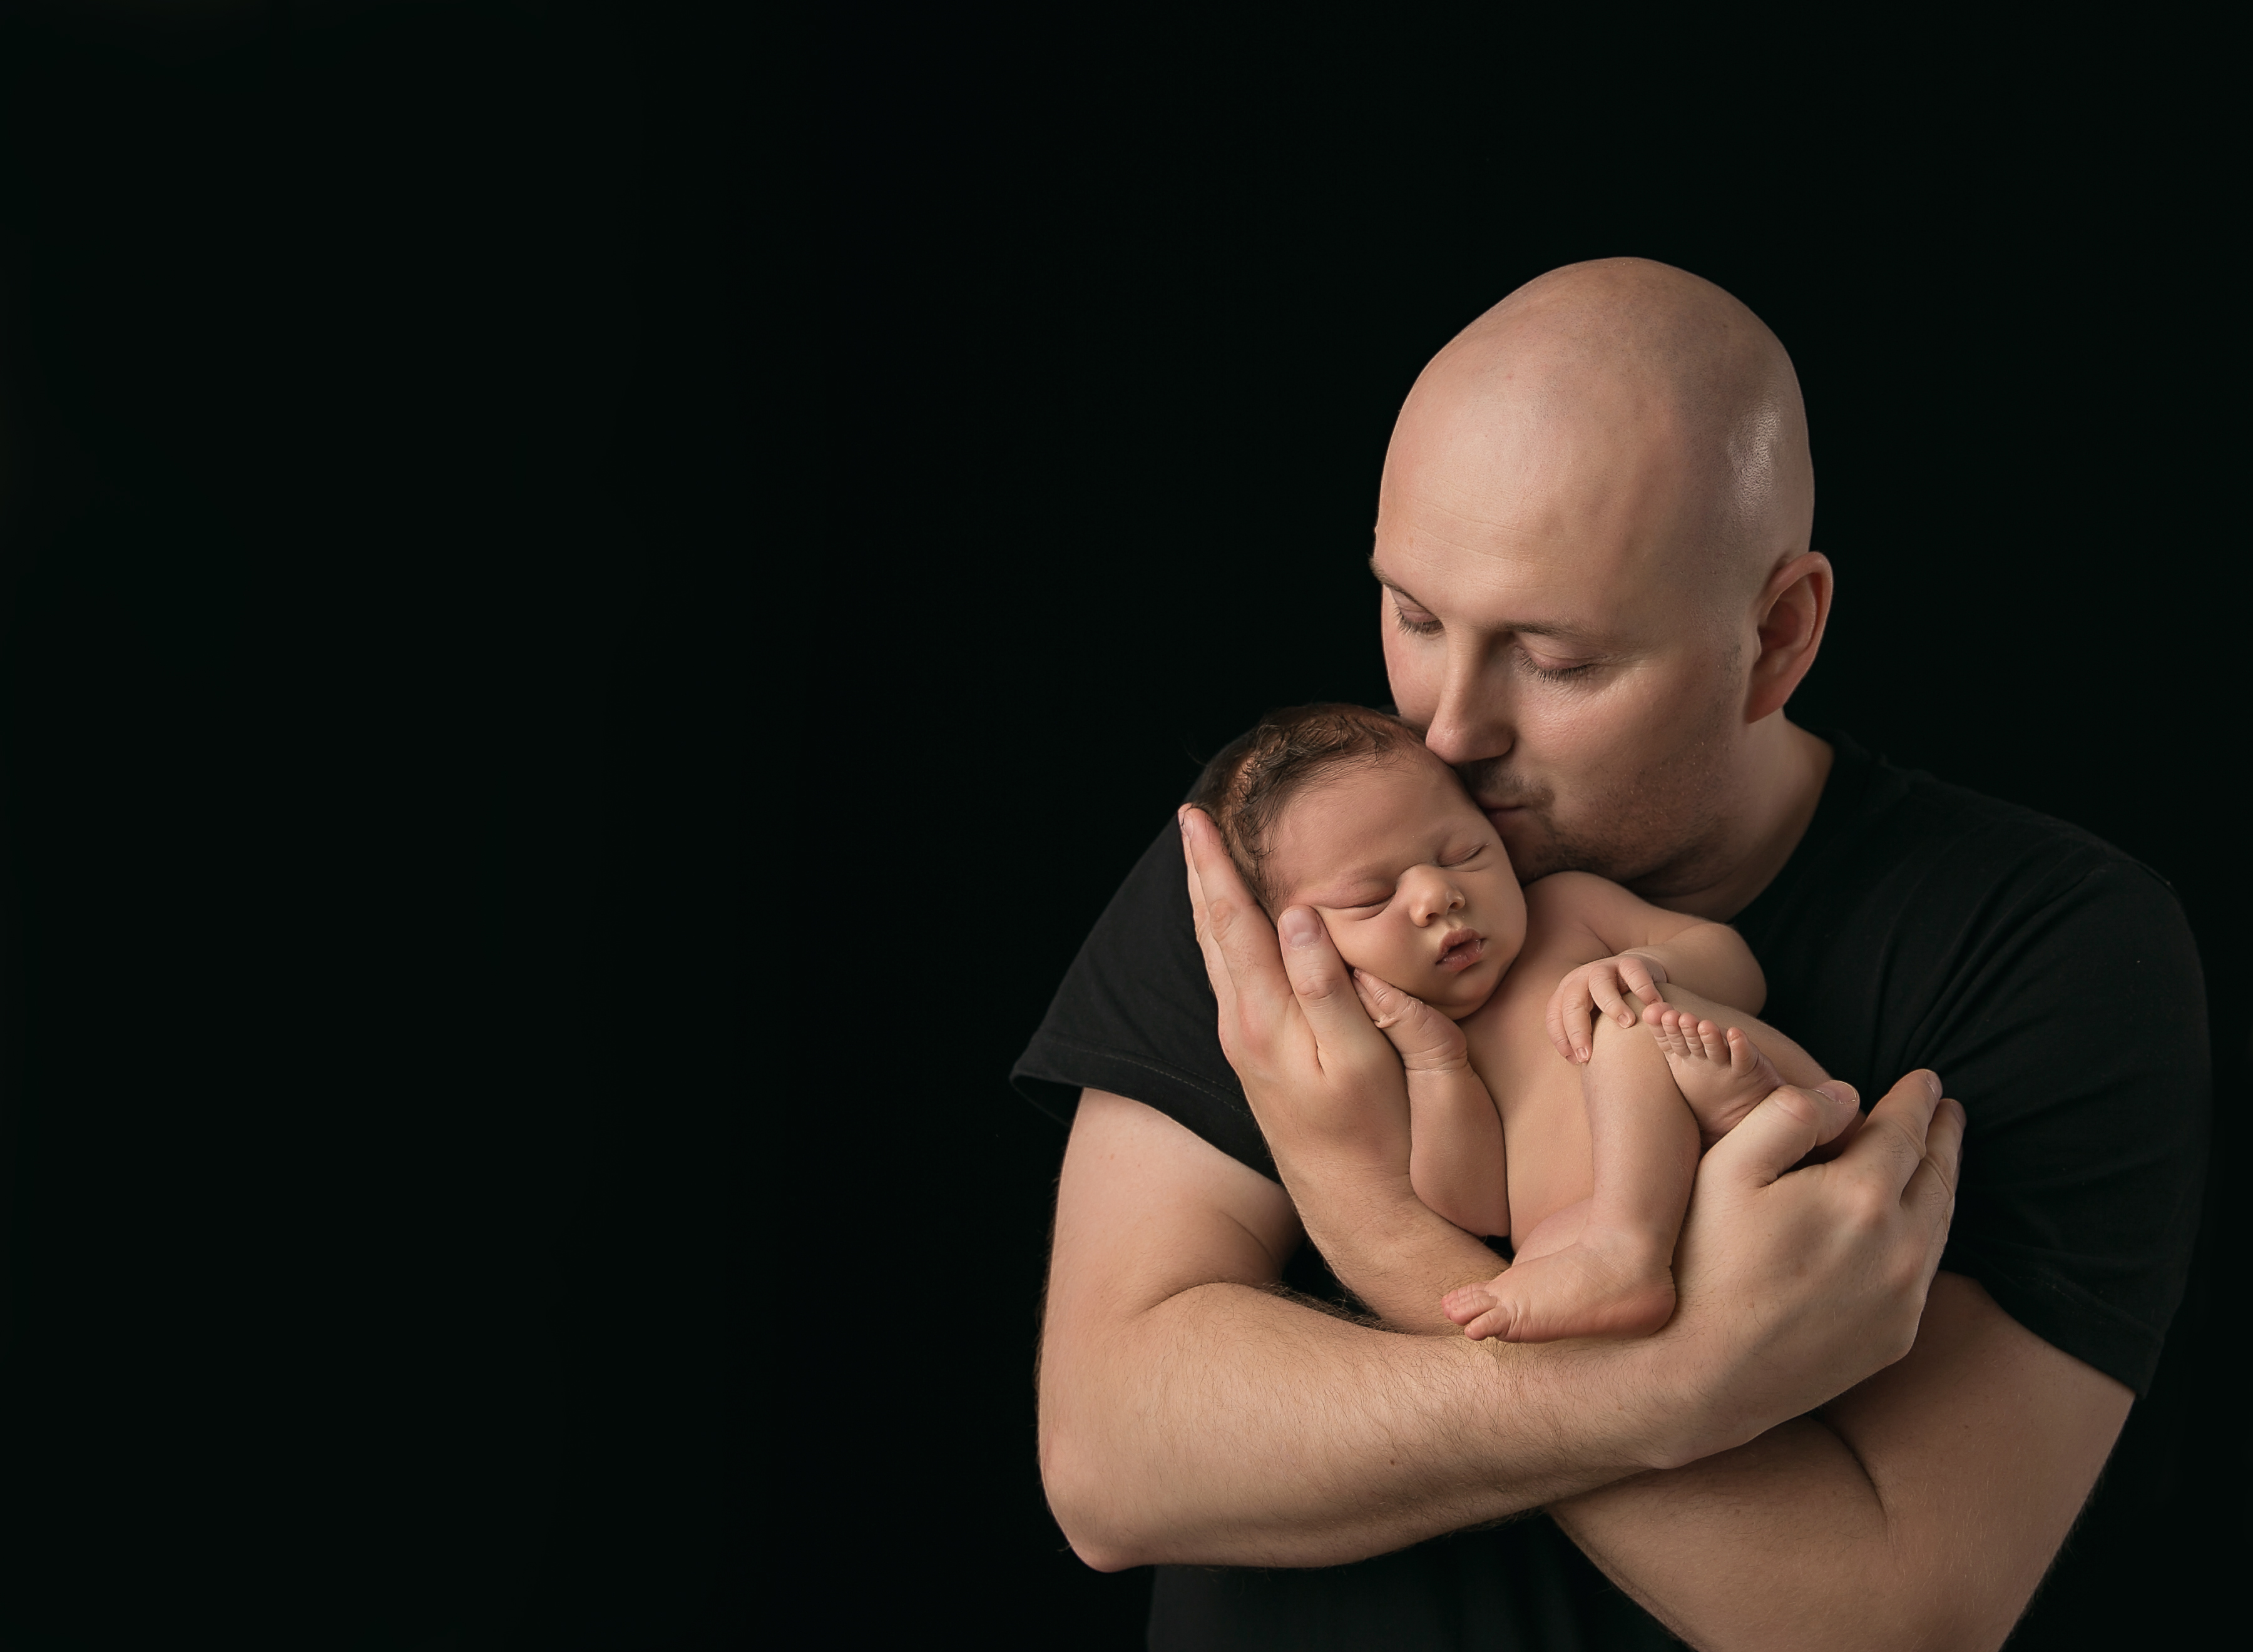 Studio portrait with dark background of an affectionate father holding his newborn sonin his arms. Image by Helga Himer Photography, Sudbury, Ontario.